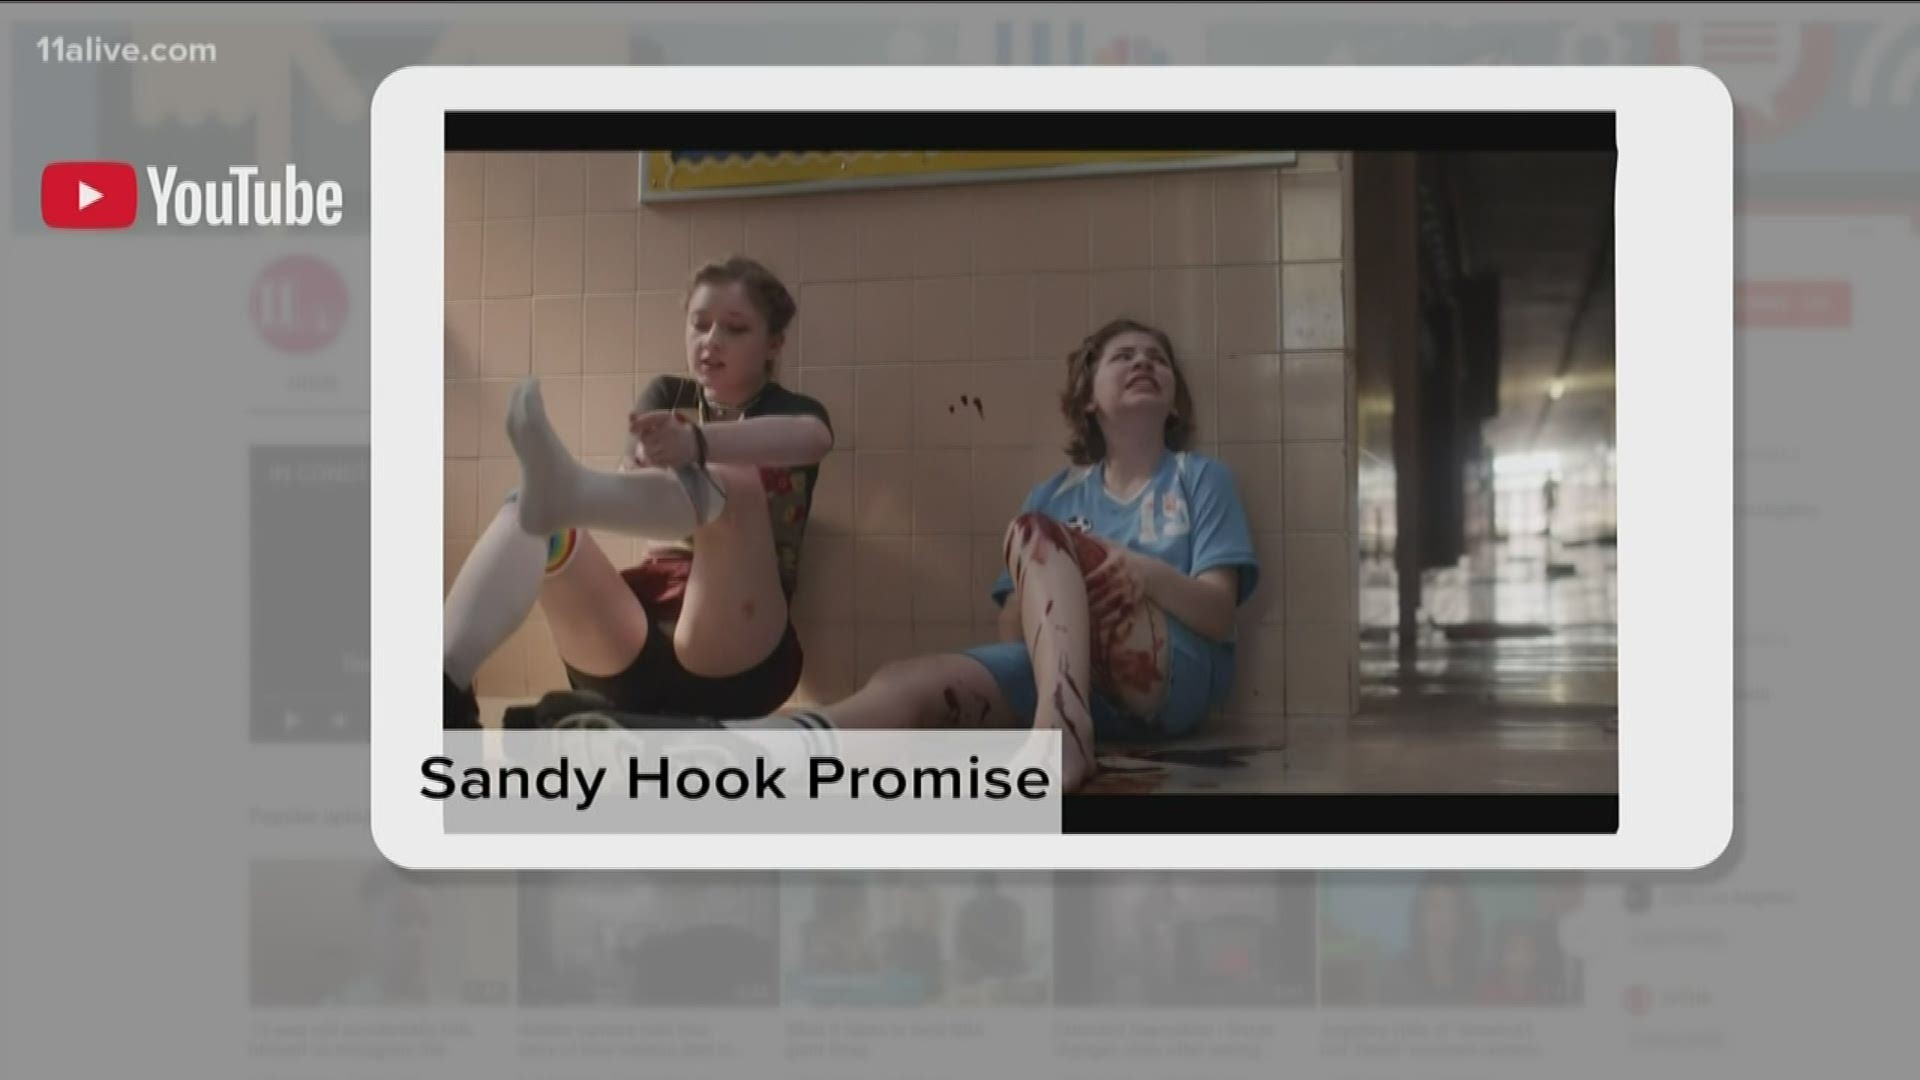 The 'Back-to-School Essentials' PSA from Sandy Hook Promise contains graphic content and may be difficult for some to watch.